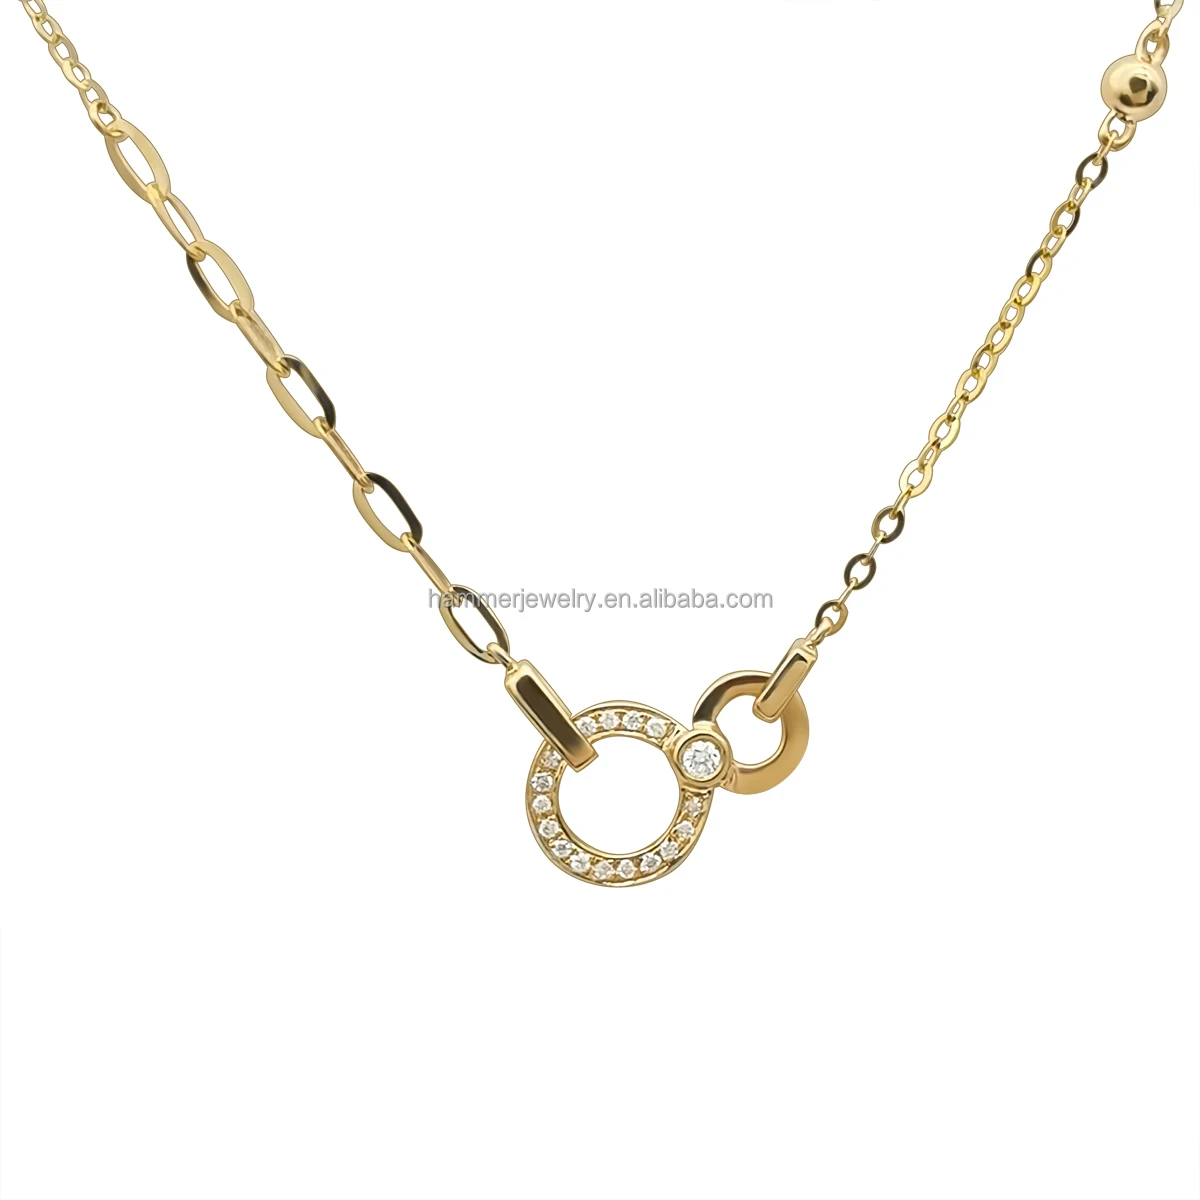 

Wholesale 14k Solid Gold AU585 Necklace for Women Personalized Lab-Grown Diamond and Stone Pendant on Link Chain